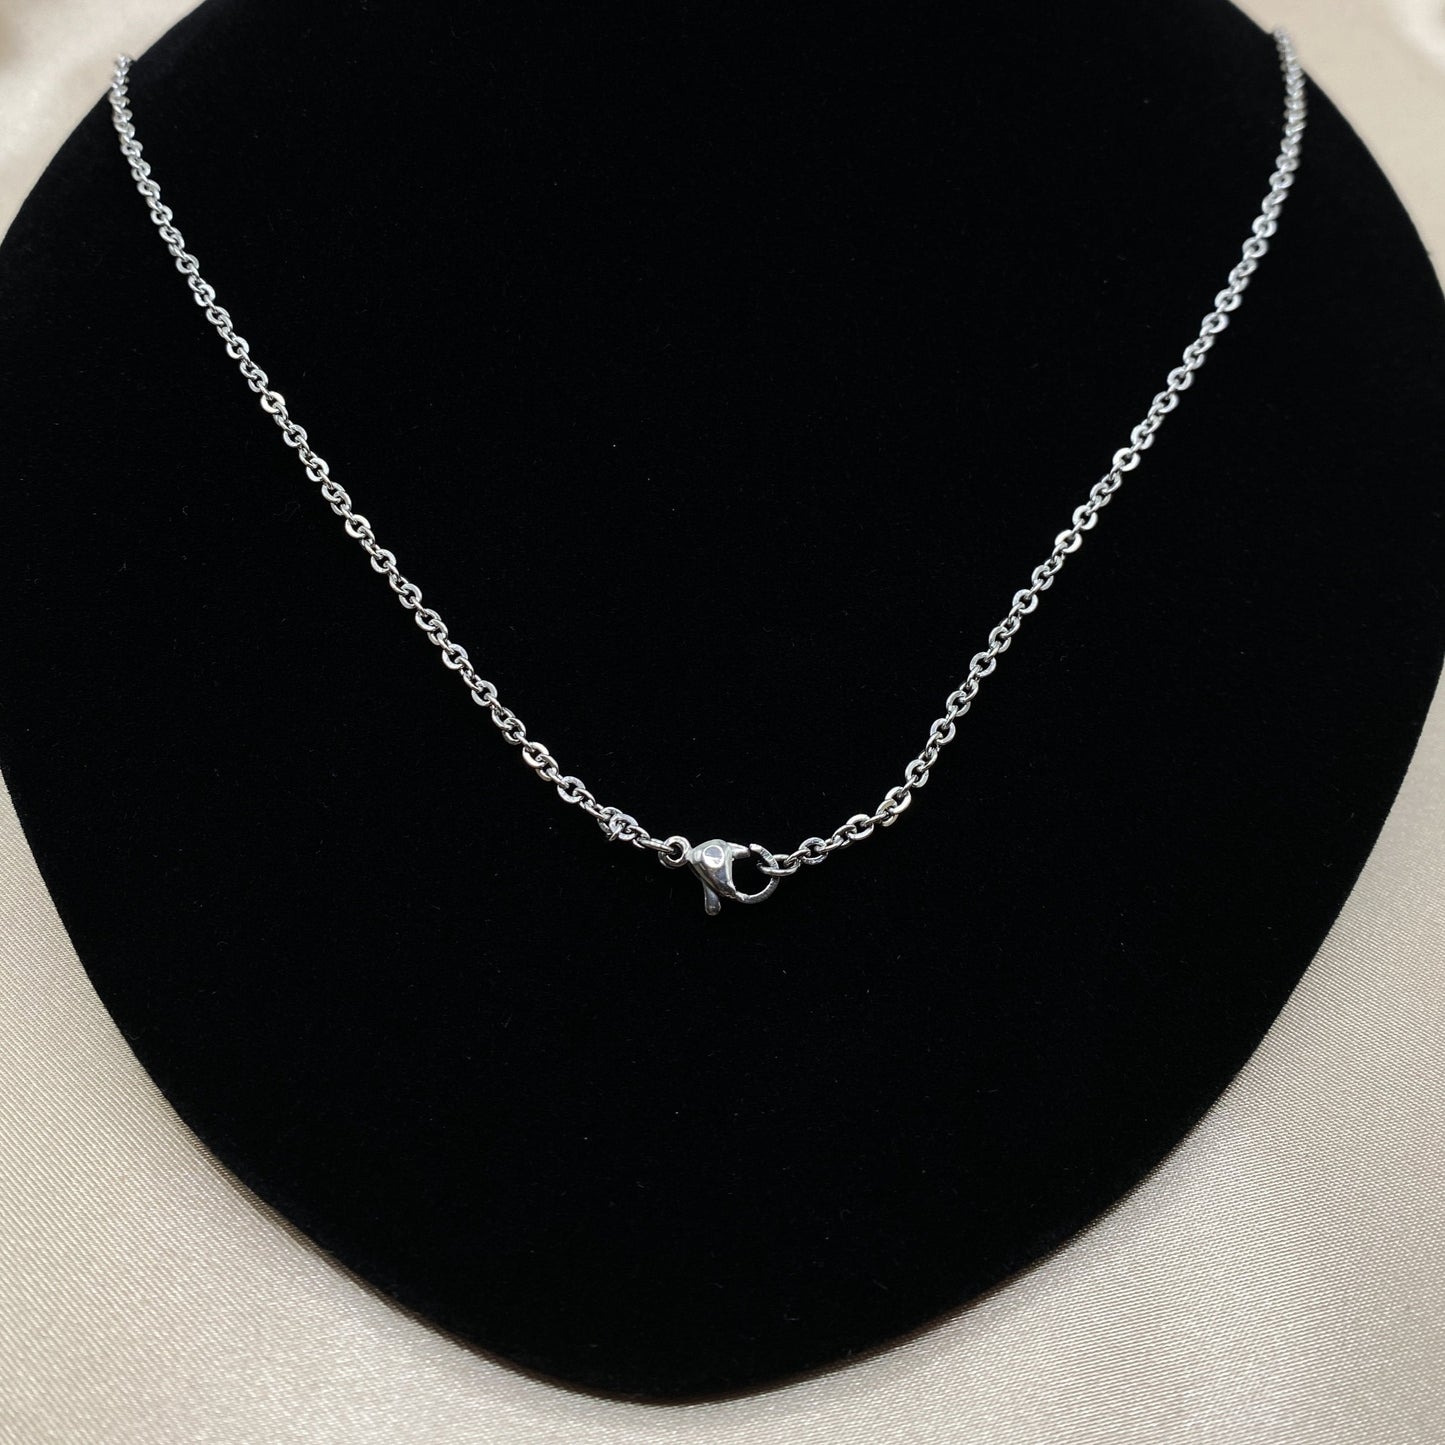 Silver Cylinder Cremation Urn Necklace with Clear Stone - Dainty Stainless Steel Memorial Jewelry for Holding Human or Pet Ashes